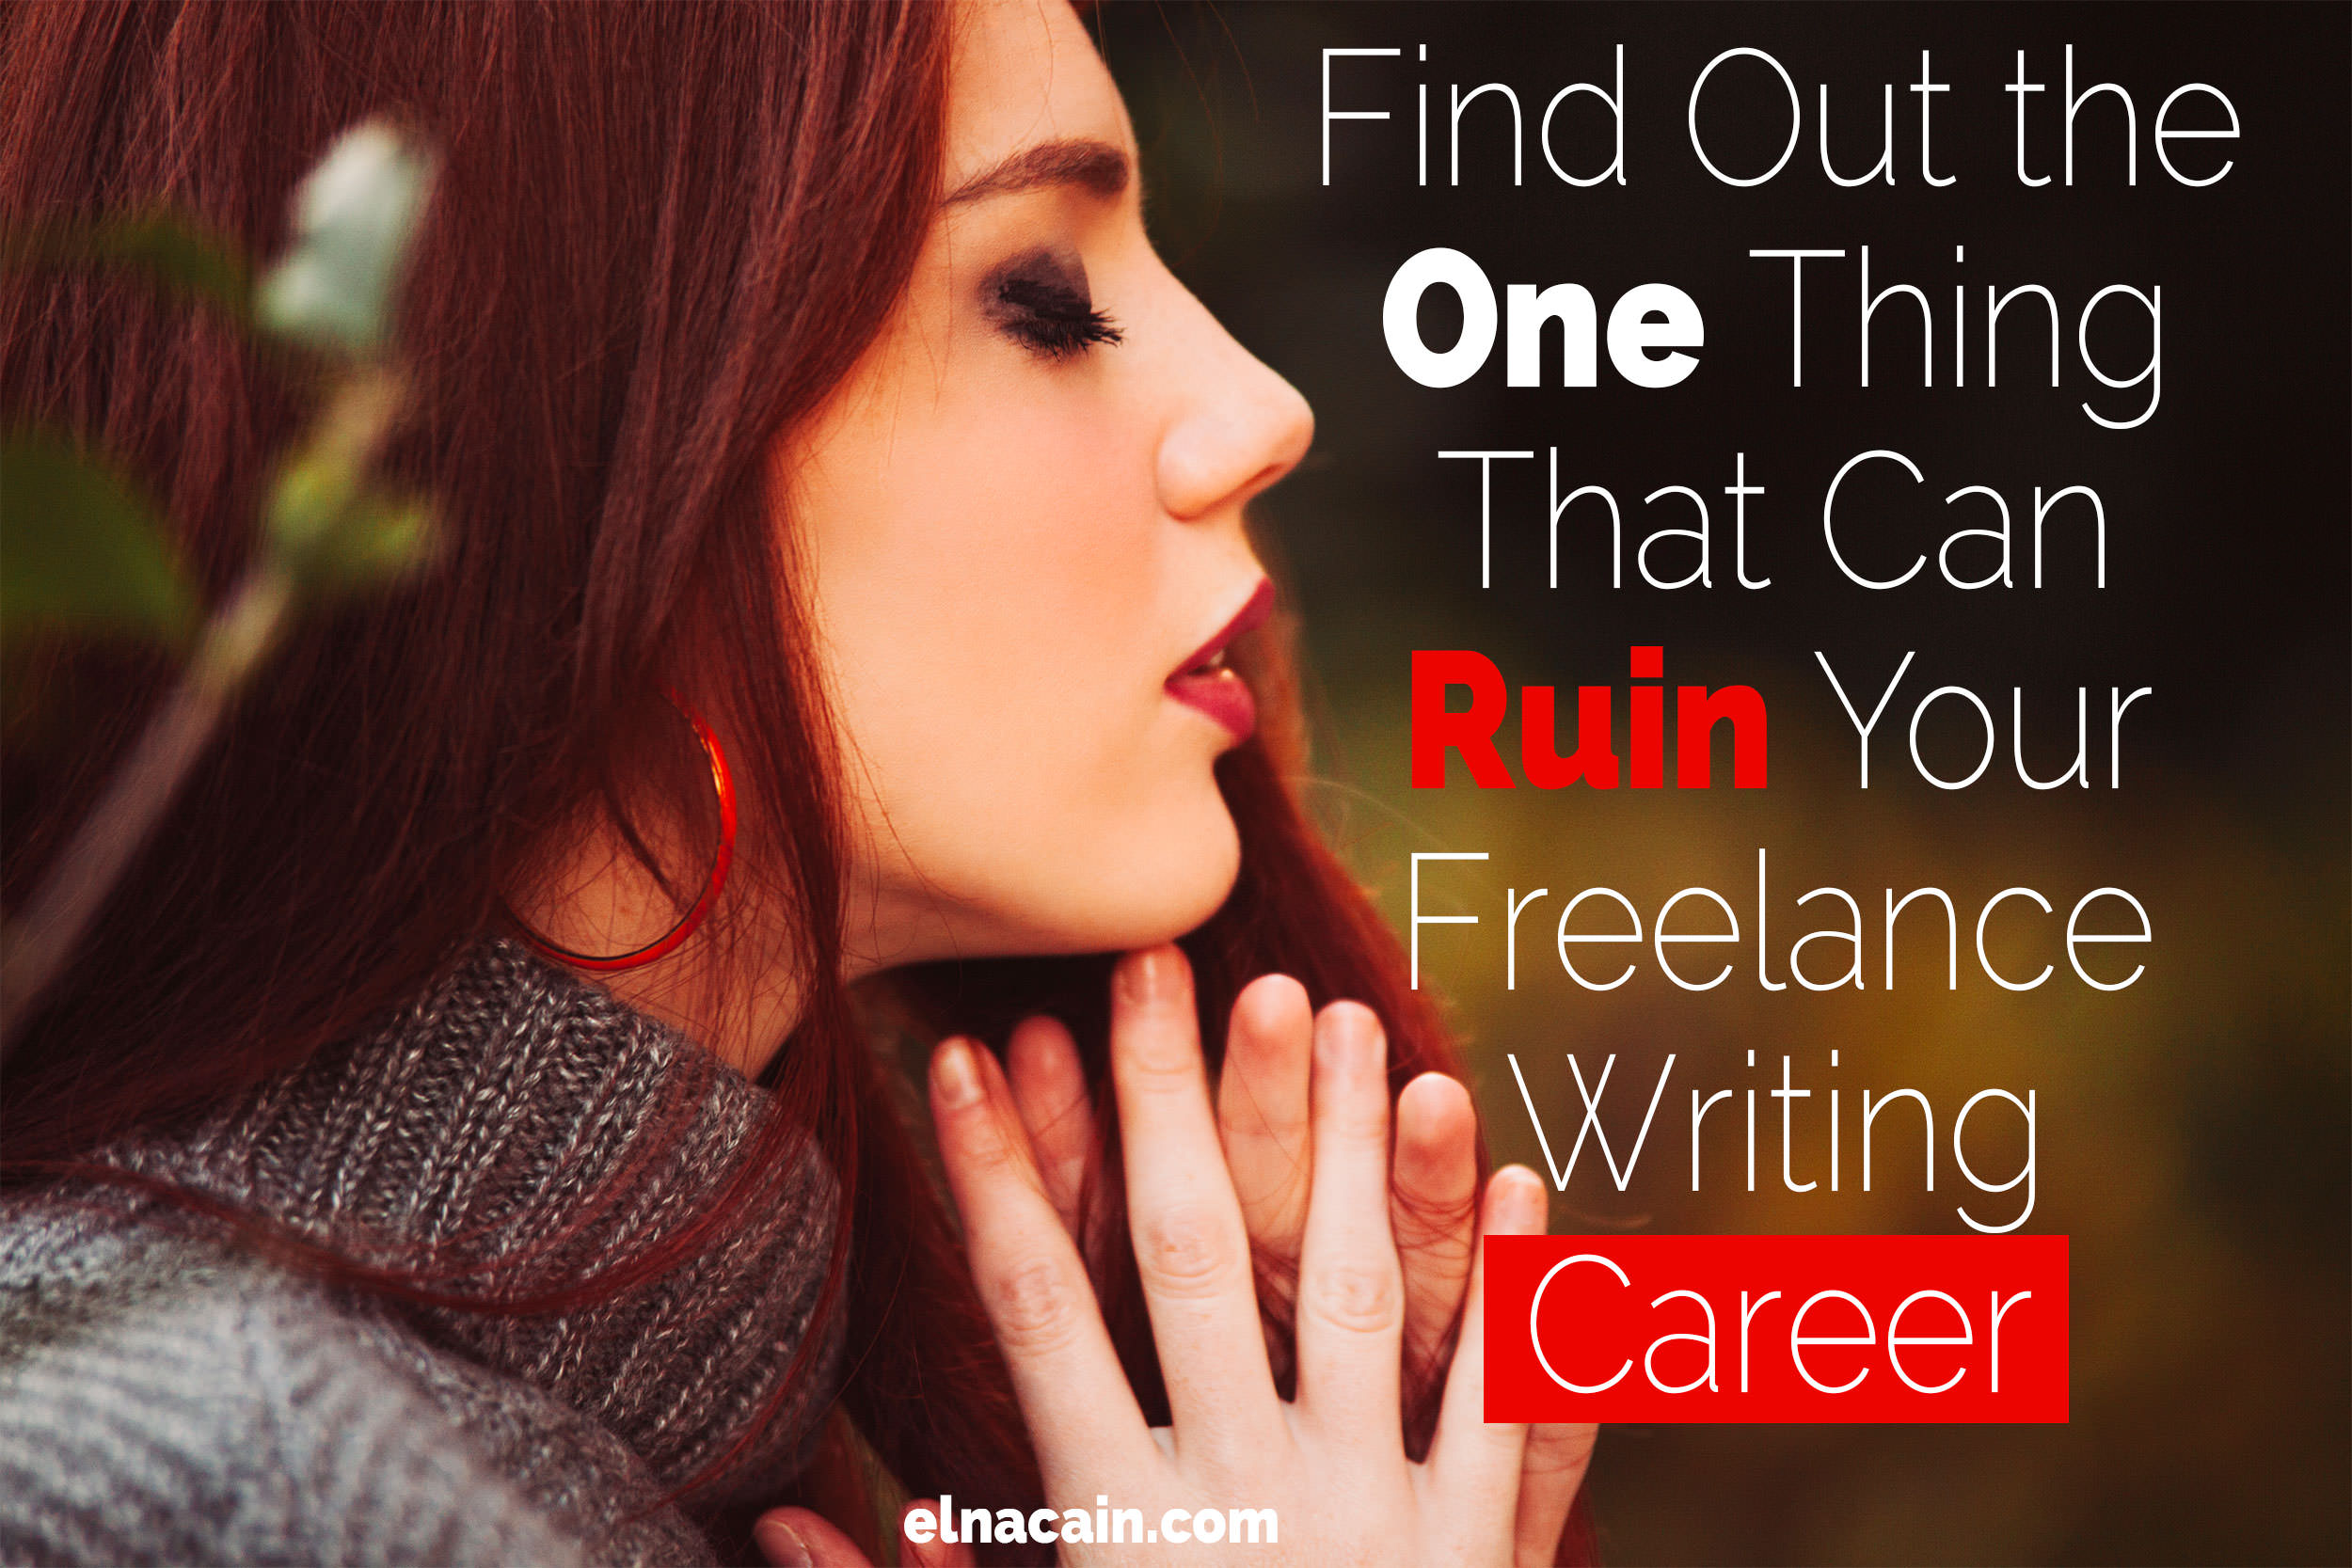 How does a person become a freelance writer?